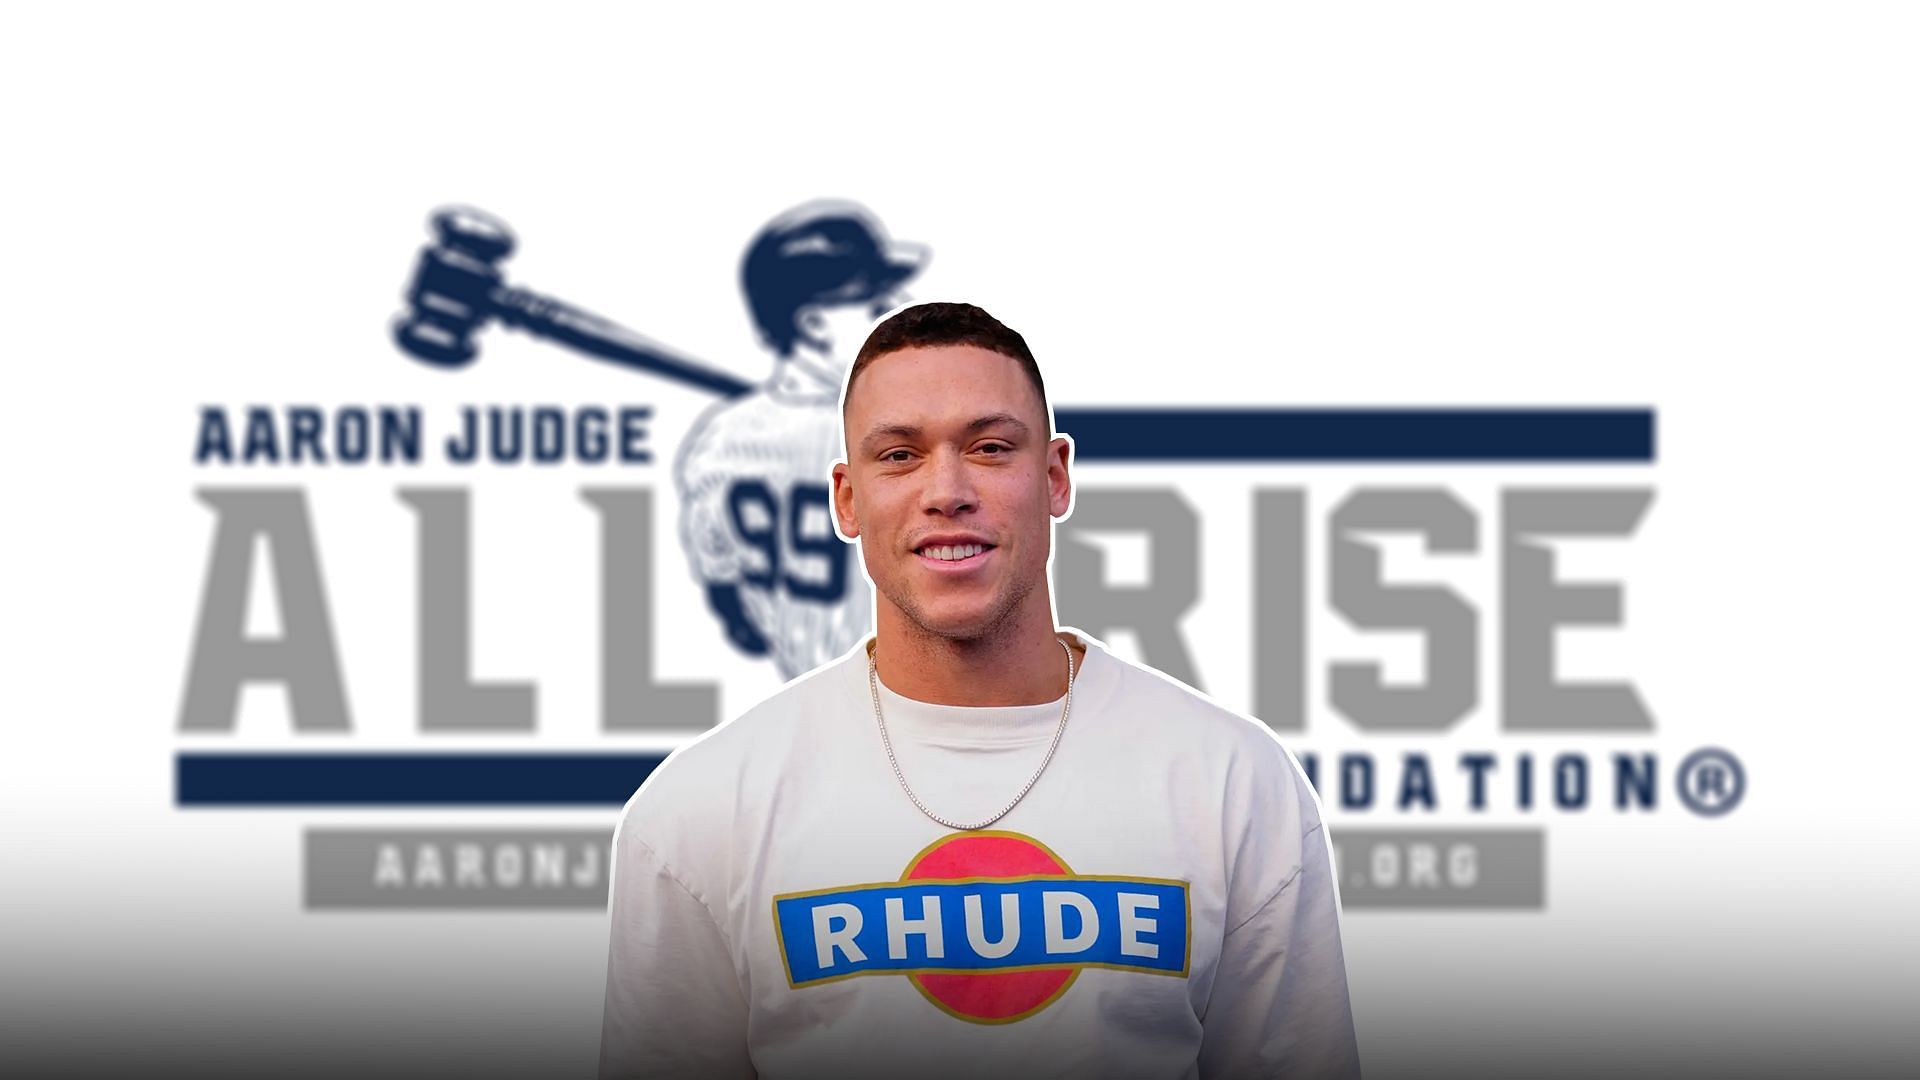 A ball autographed by John Heisman was in the auction of organized by Yankees star Aaron Judge